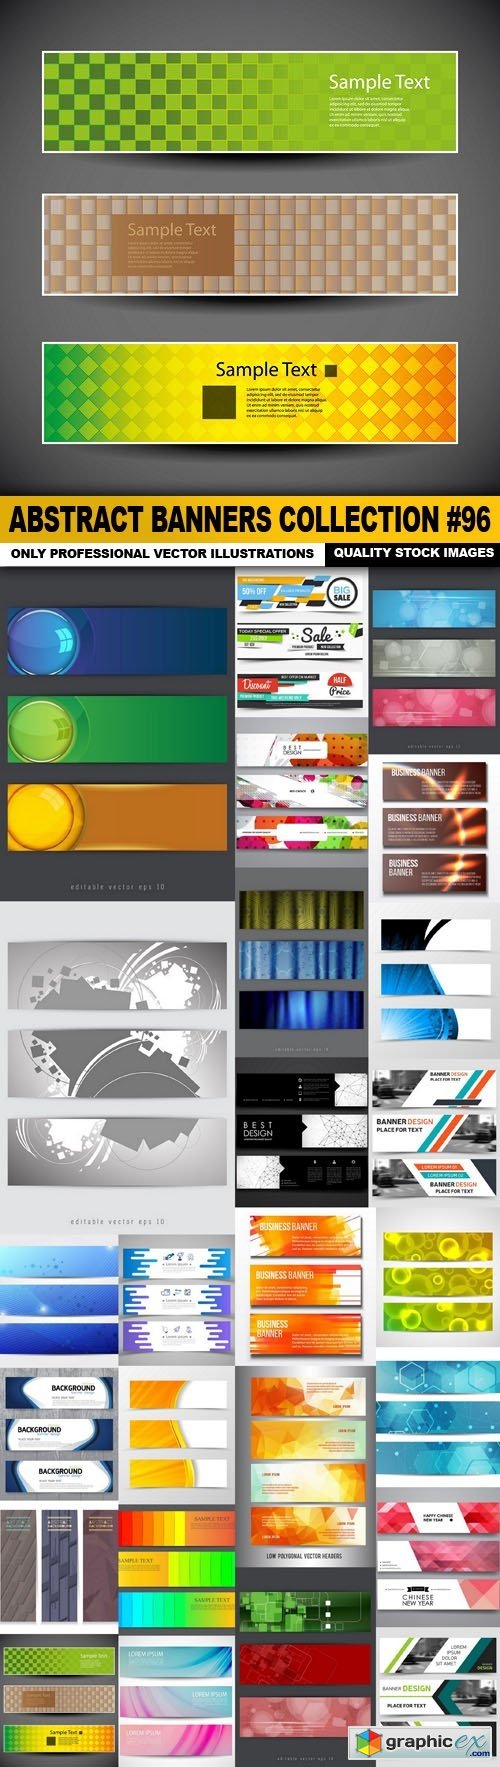 Abstract Banners Collection #96 - 25 Vectors